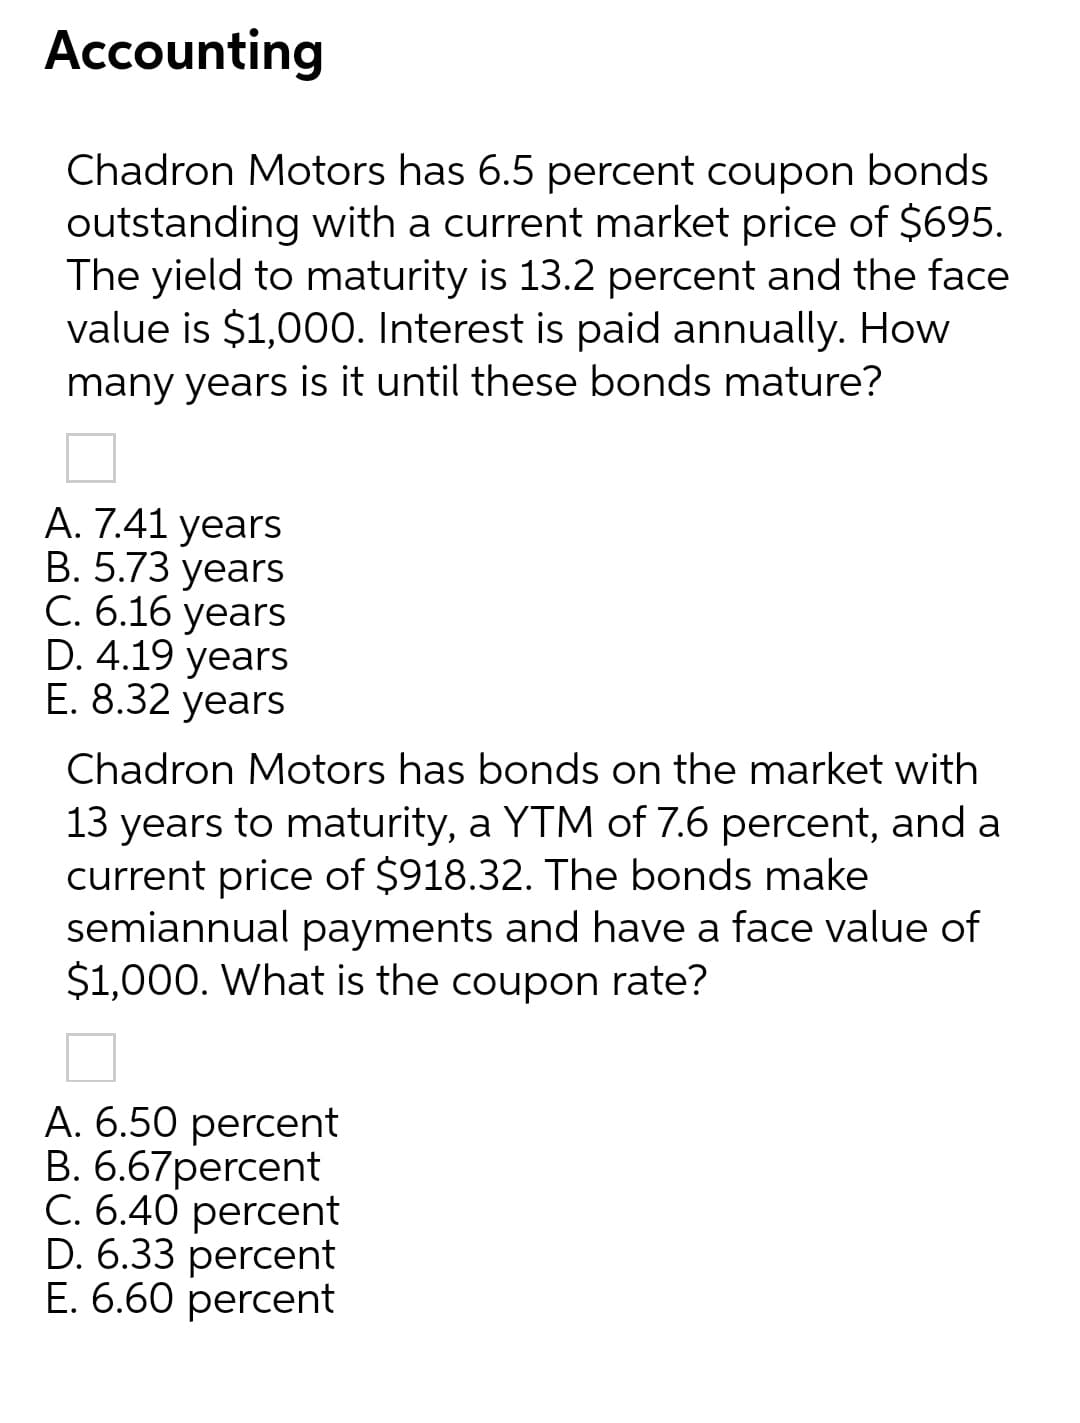 Accounting
Chadron Motors has 6.5 percent coupon bonds
outstanding with a current market price of $695.
The yield to maturity is 13.2 percent and the face
value is $1,000. Interest is paid annually. How
many years is it until these bonds mature?
А. 7.41 years
В. 5.73 years
С. 6.16 уears
D. 4.19 years
E. 8.32 years
Chadron Motors has bonds on the market with
13 years to maturity, a YTM of 7.6 percent, and a
current price of $918.32. The bonds make
semiannual payments and have a face value
$1,000. What is the coupon rate?
A. 6.50 percent
В. 6.67рercent
C. 6.40 percent
D. 6.33 percent
Е. 6.60 рercent
